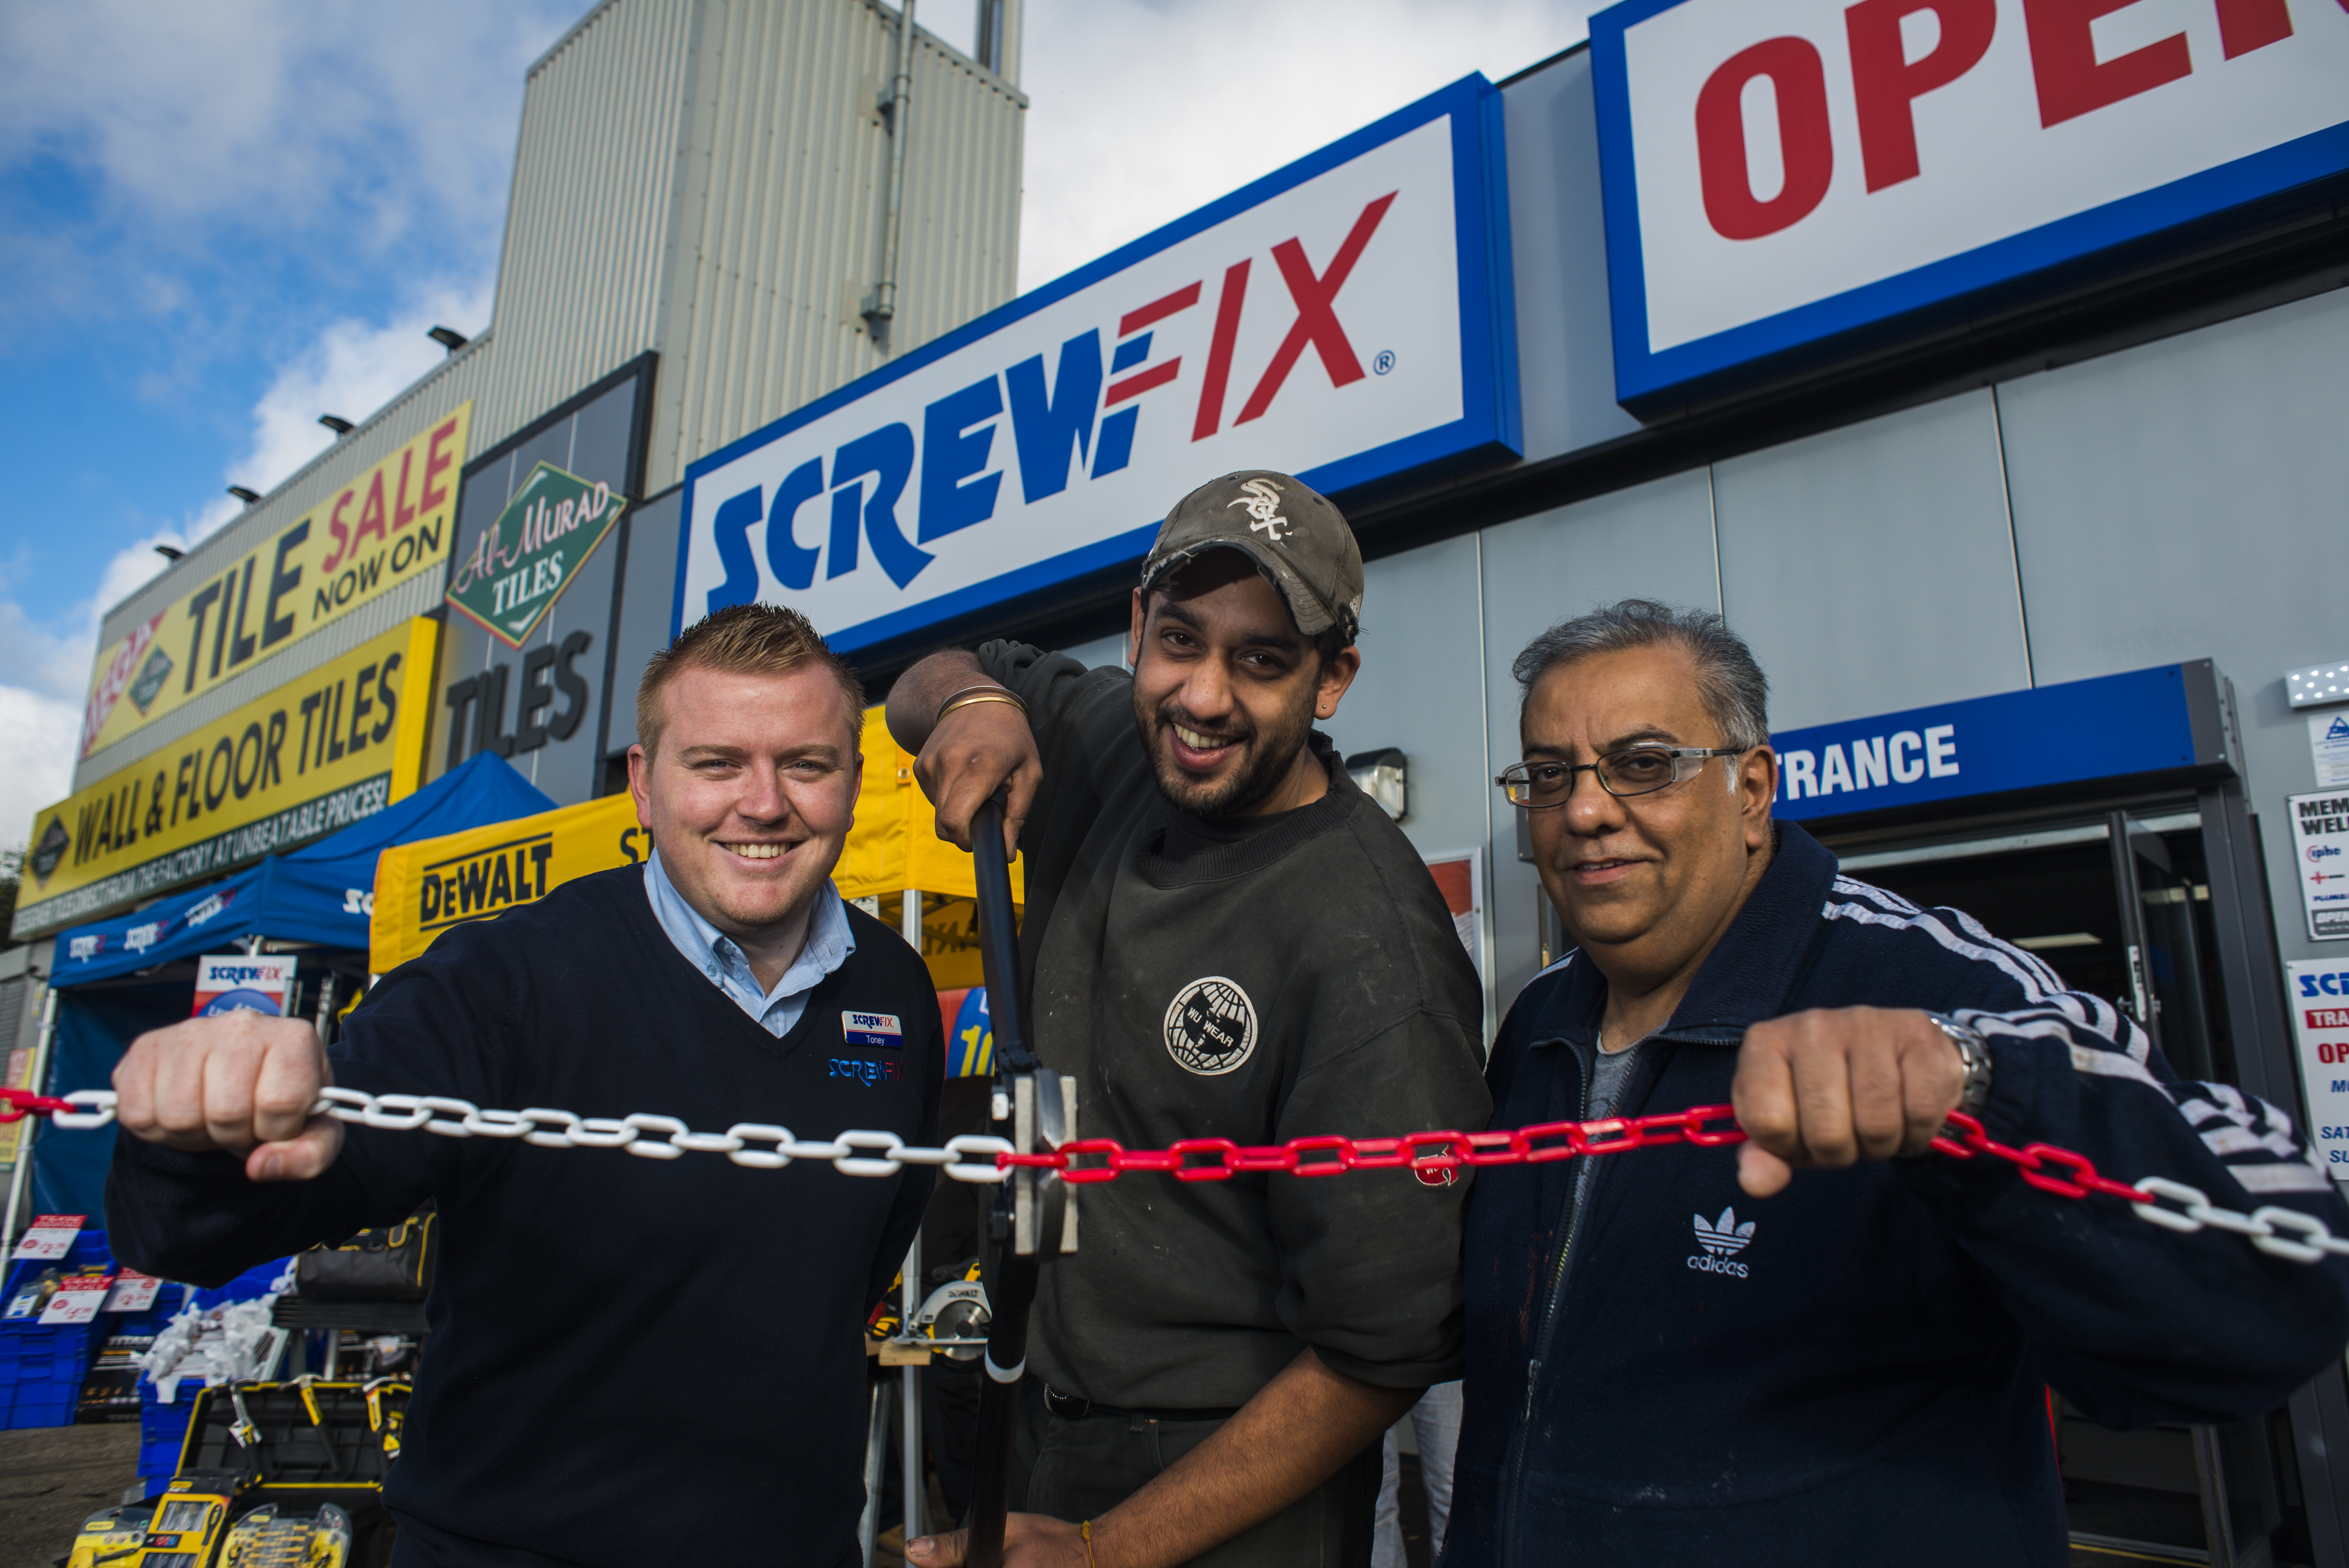 Ilford’s first Screwfix store is declared a runaway success